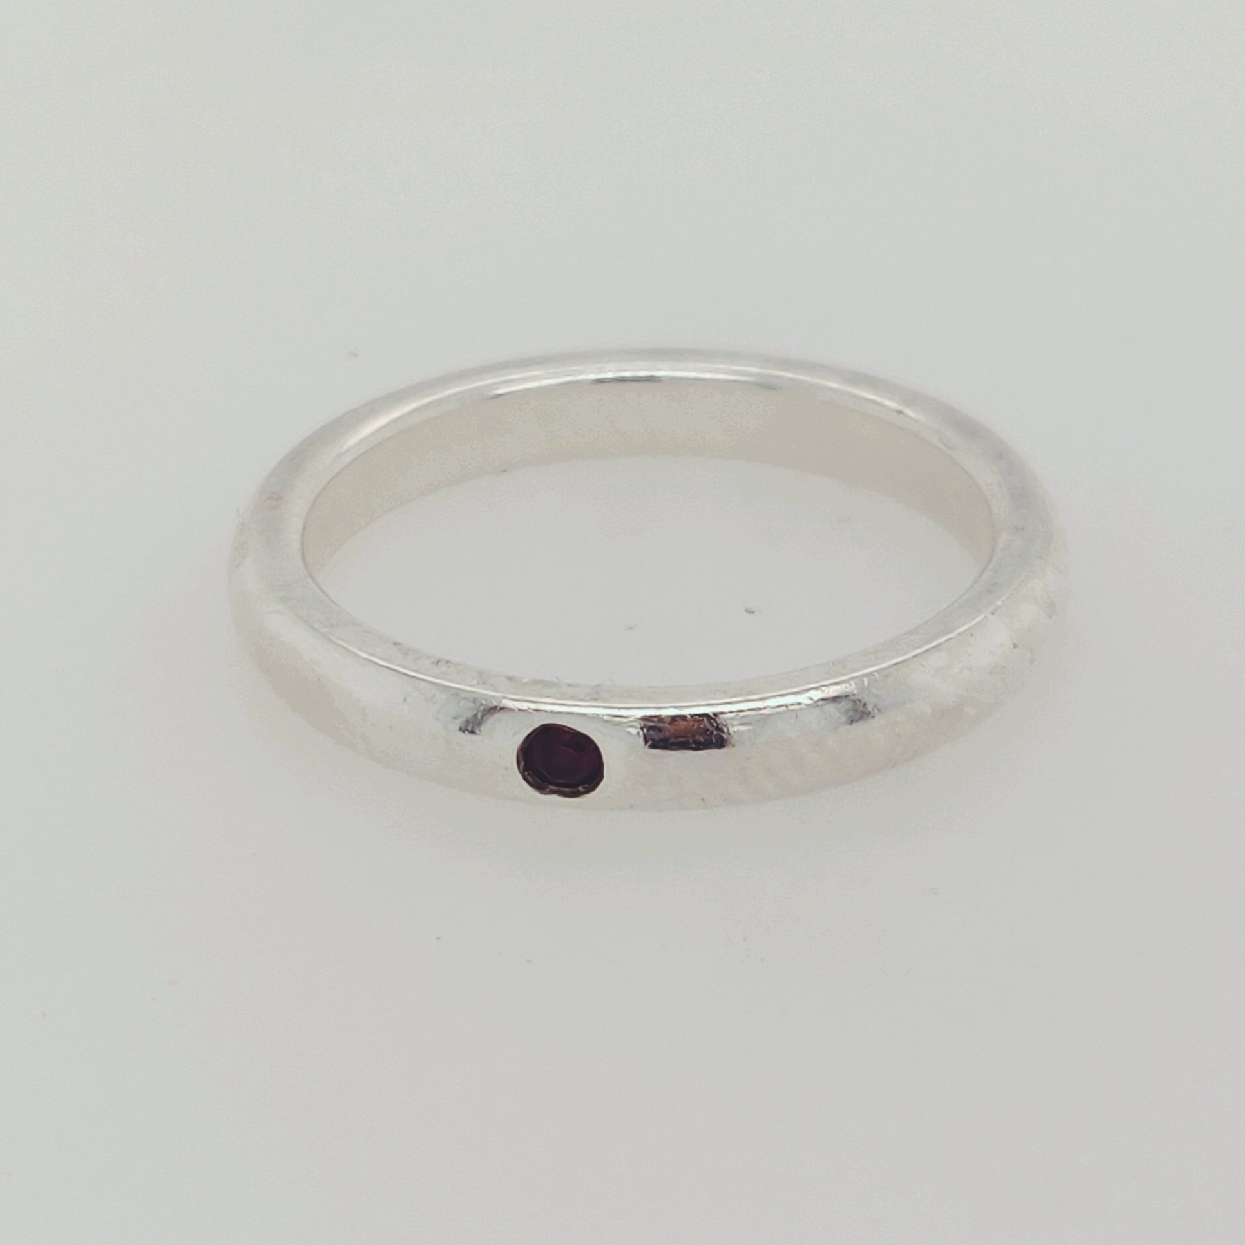 Retired Sterling Silver Tiffany & Co. Elsa Peretti Band Ring with Ruby Size 5.5